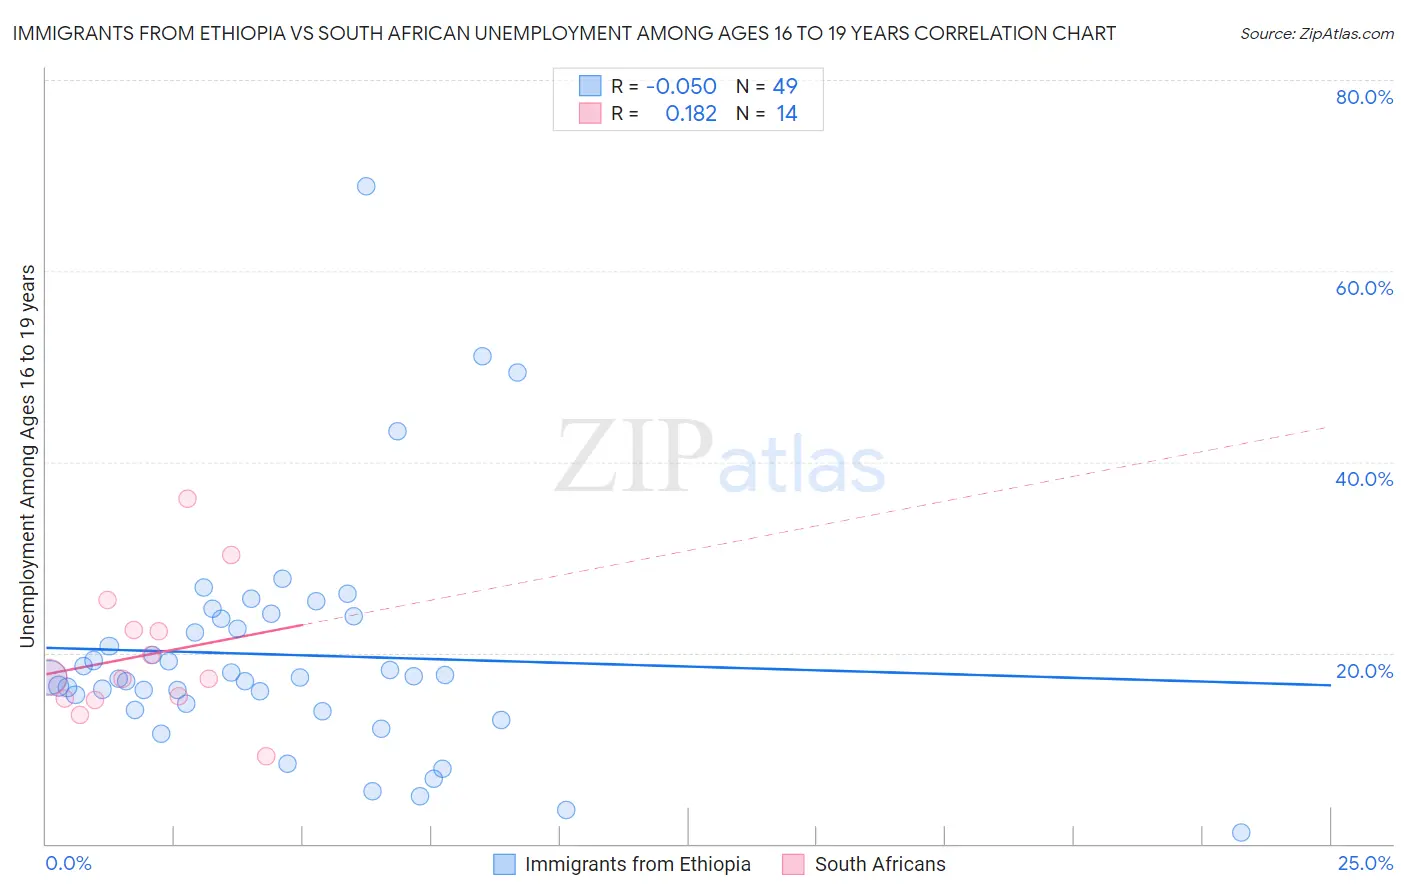 Immigrants from Ethiopia vs South African Unemployment Among Ages 16 to 19 years